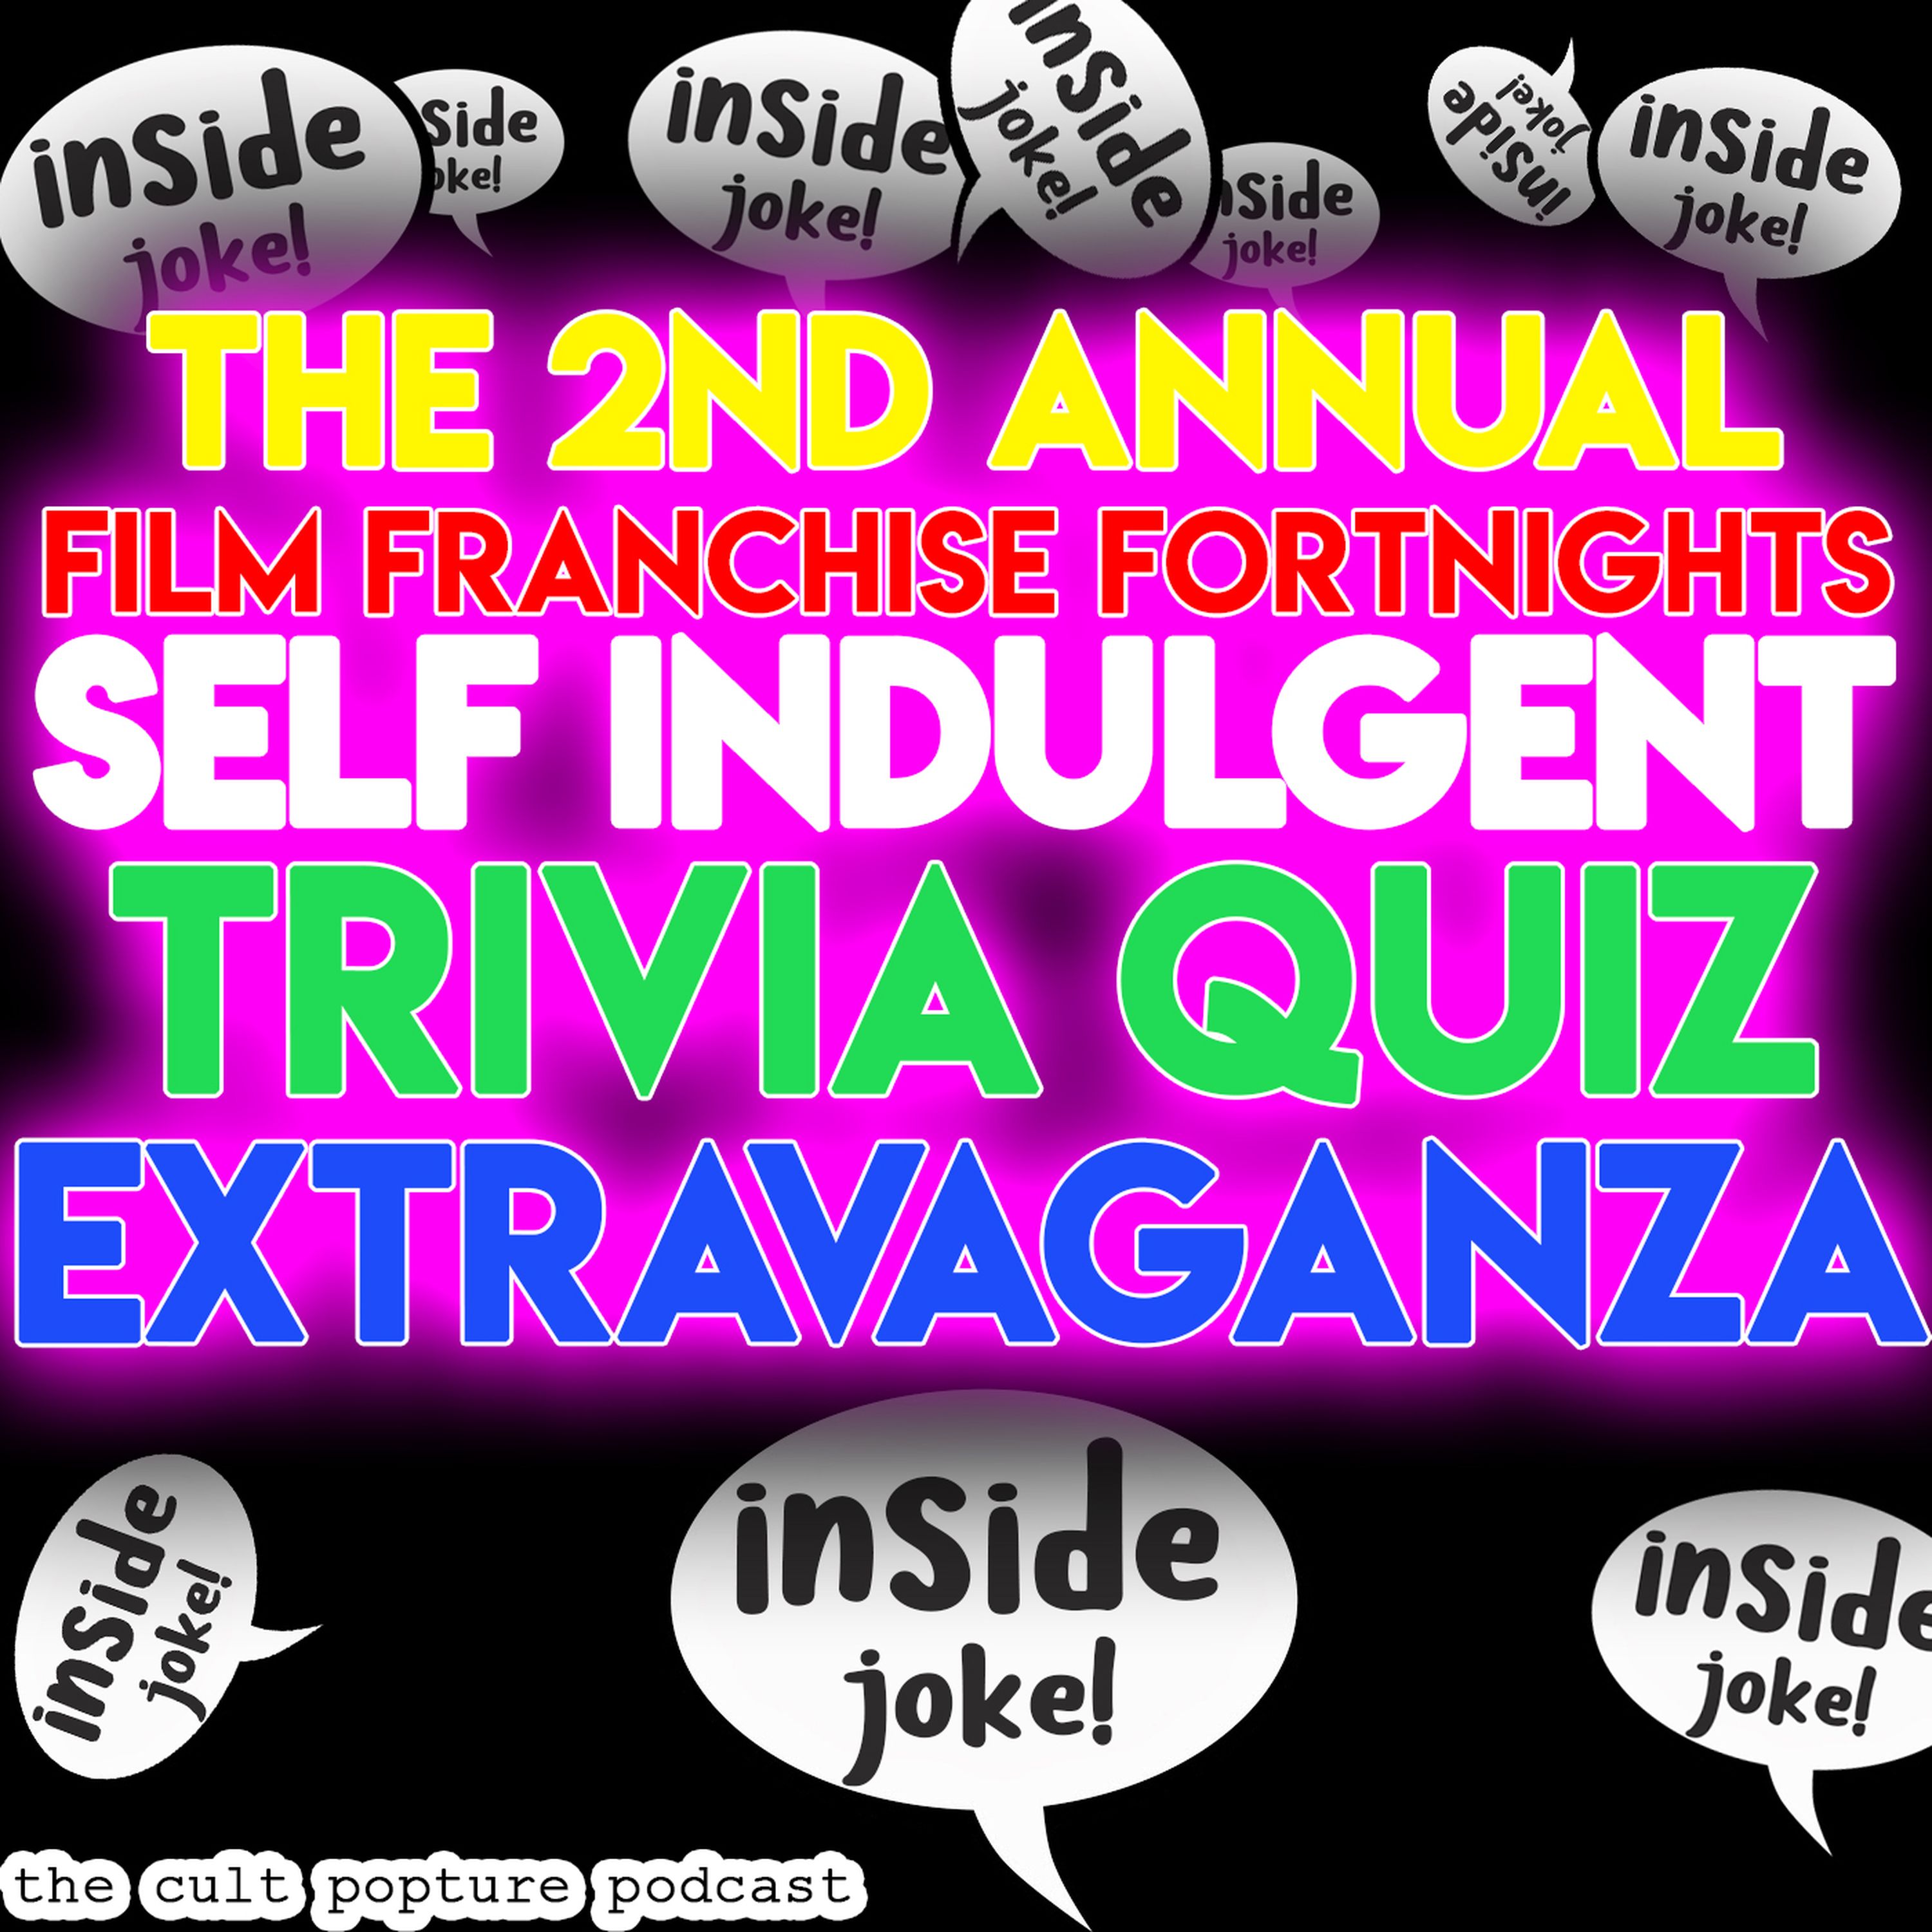 The 2nd Annual Film Franchise Fortnights Self Indulgent Trivia Quiz Extravaganza | The Cult Popture Podcast